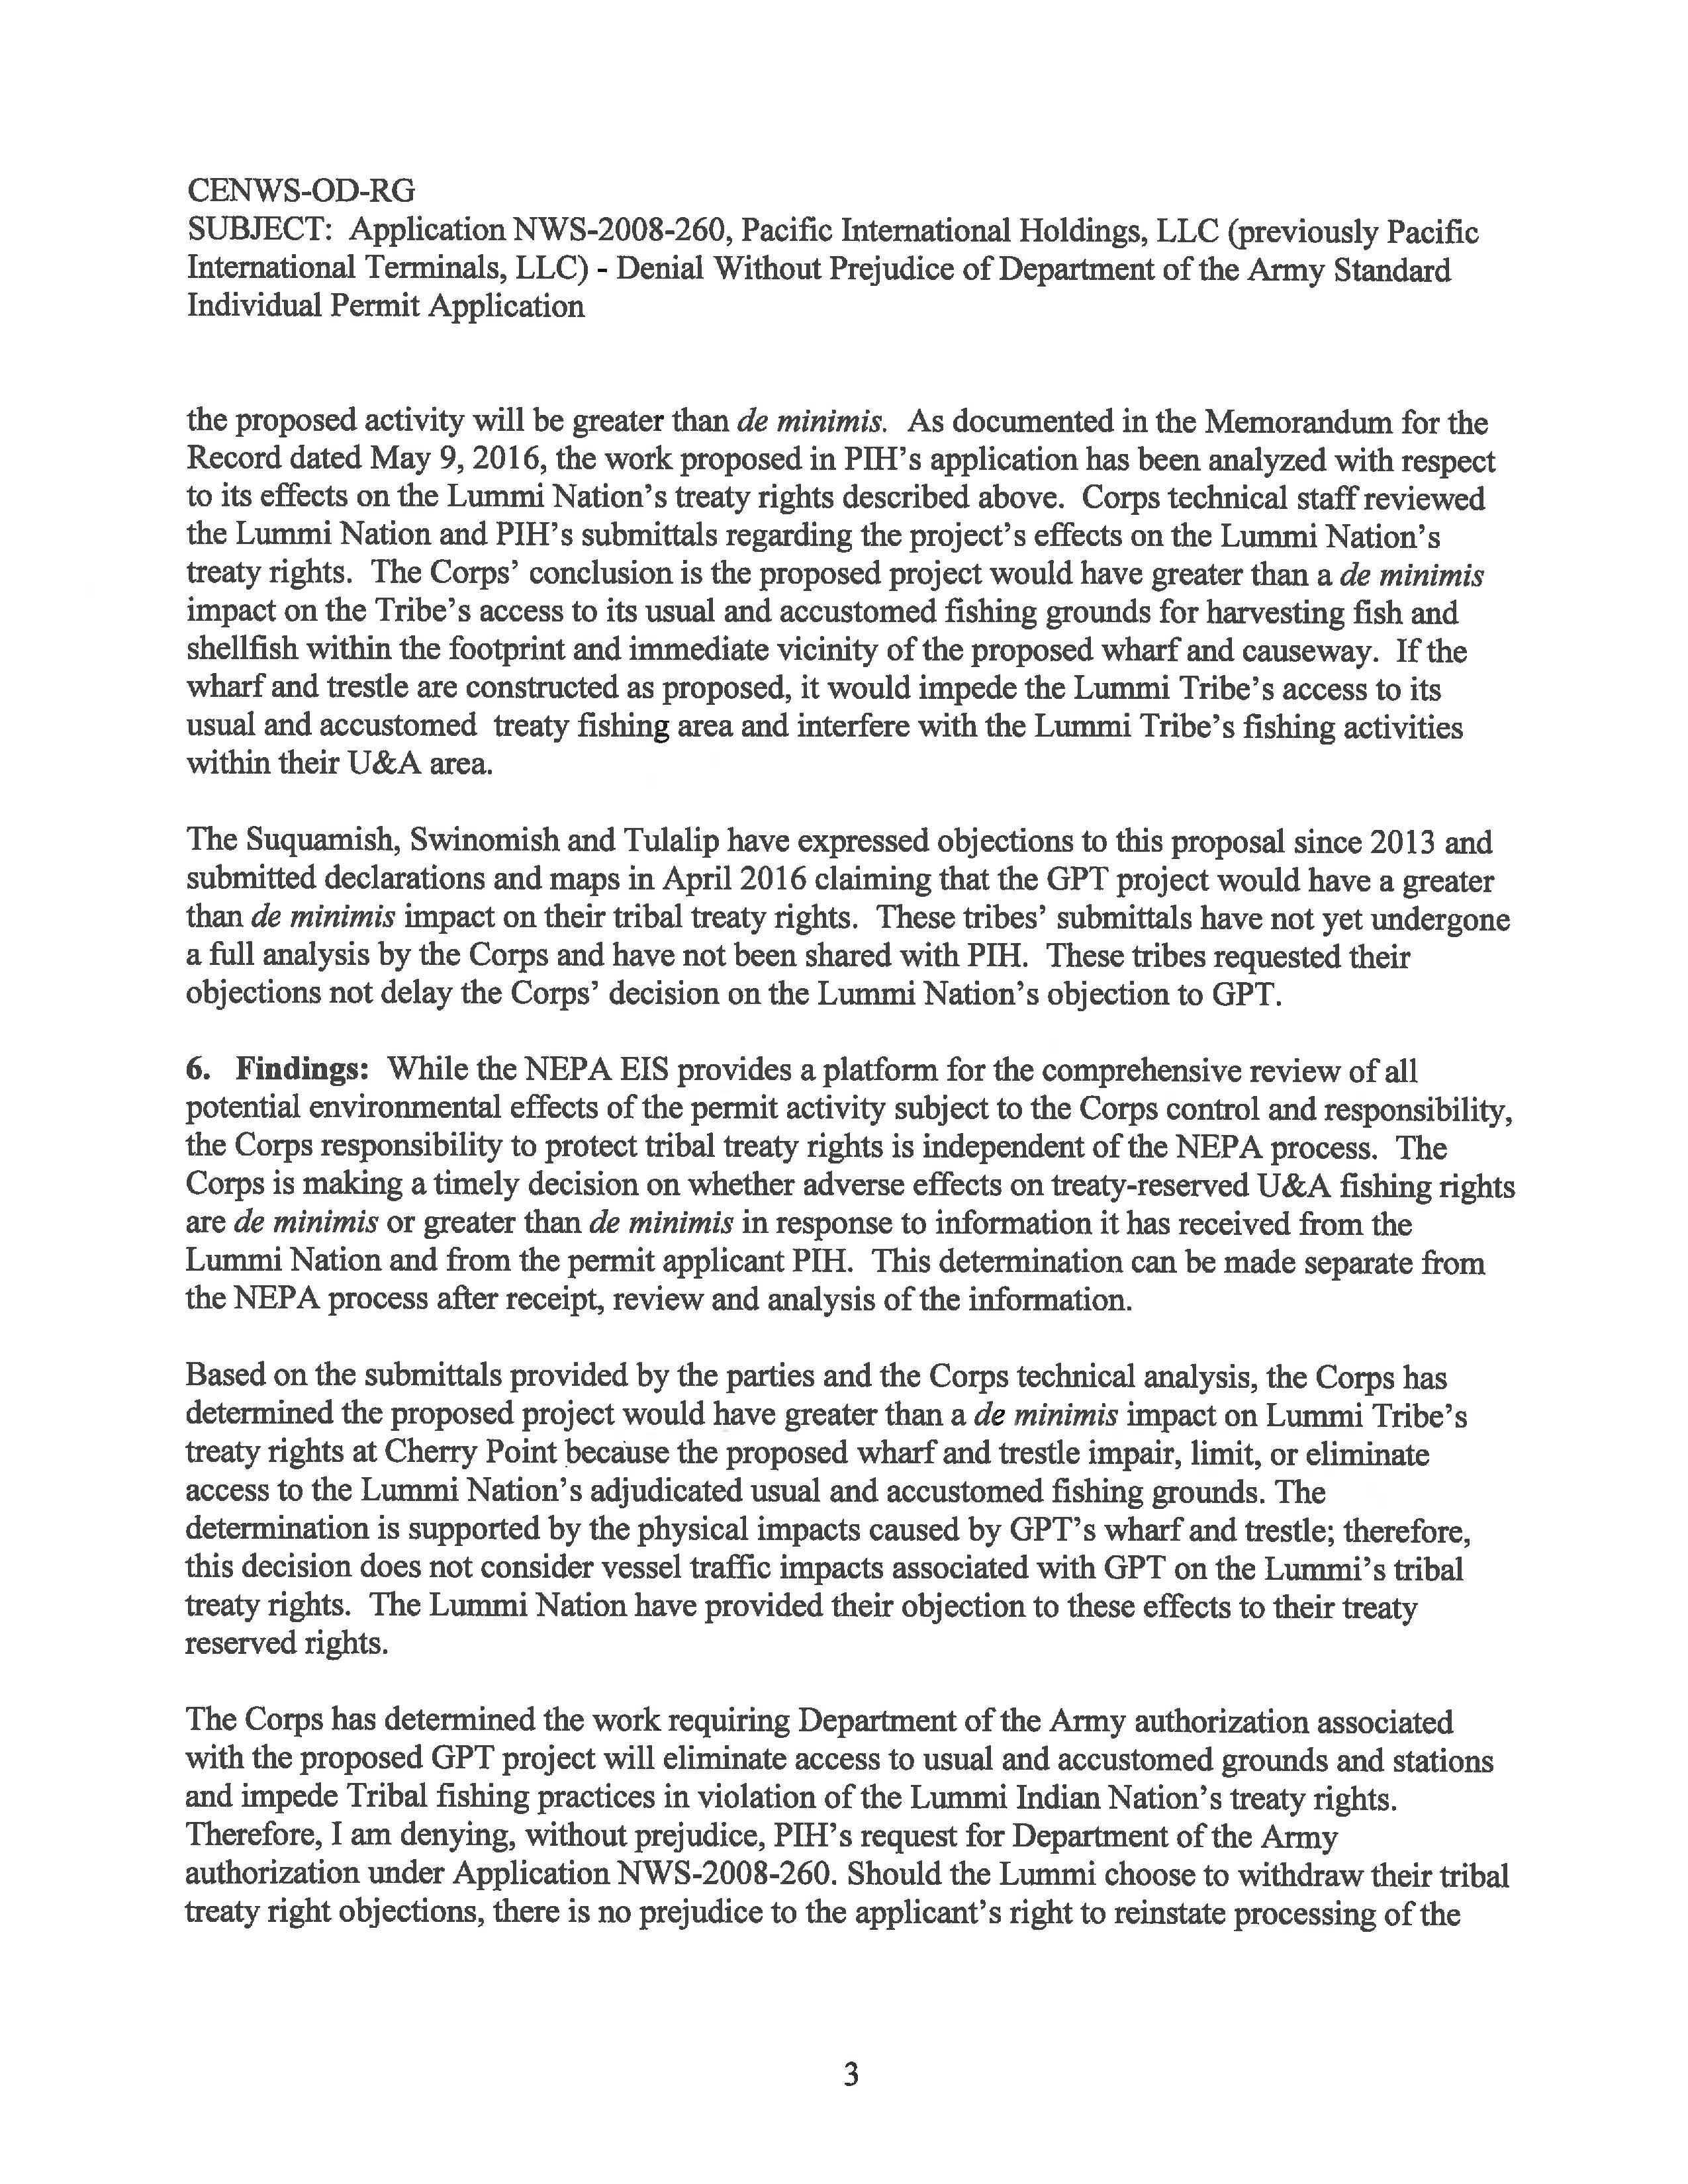 GPT denial letter - 9 May 2016_Page_4